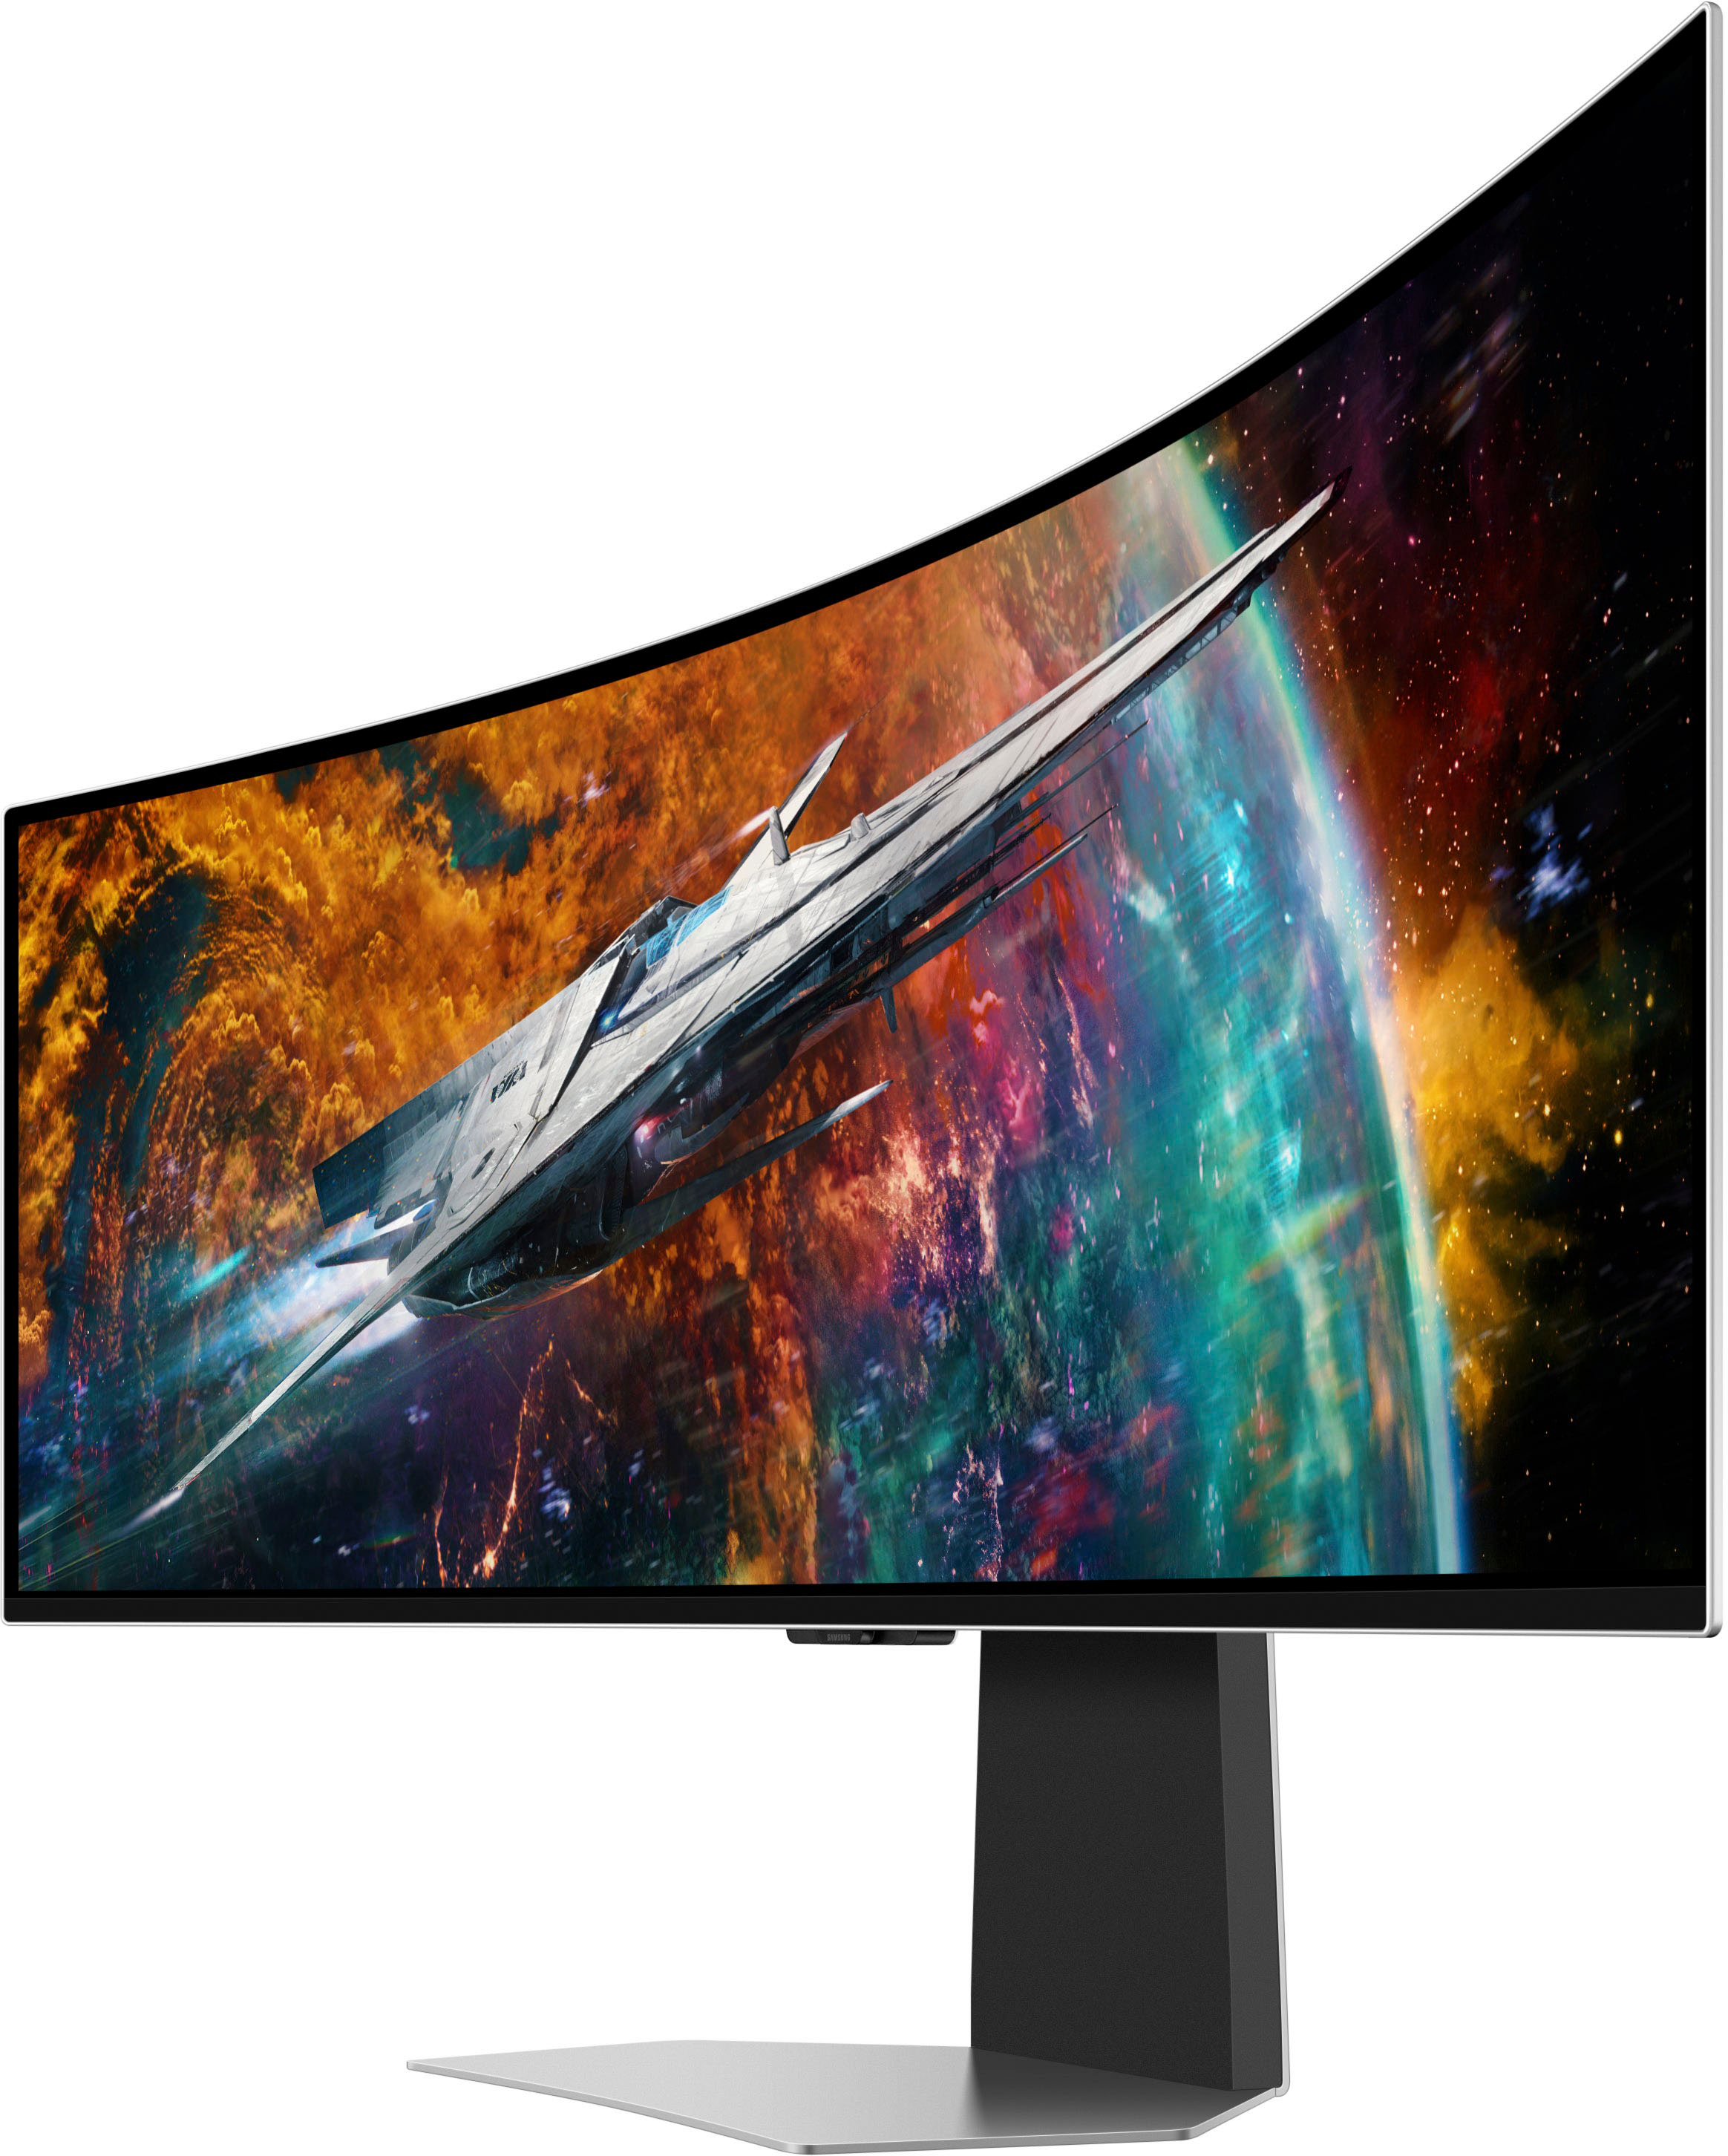 49” Samsung's largest 1000R gaming monitor - LC49G95TSSNXZA